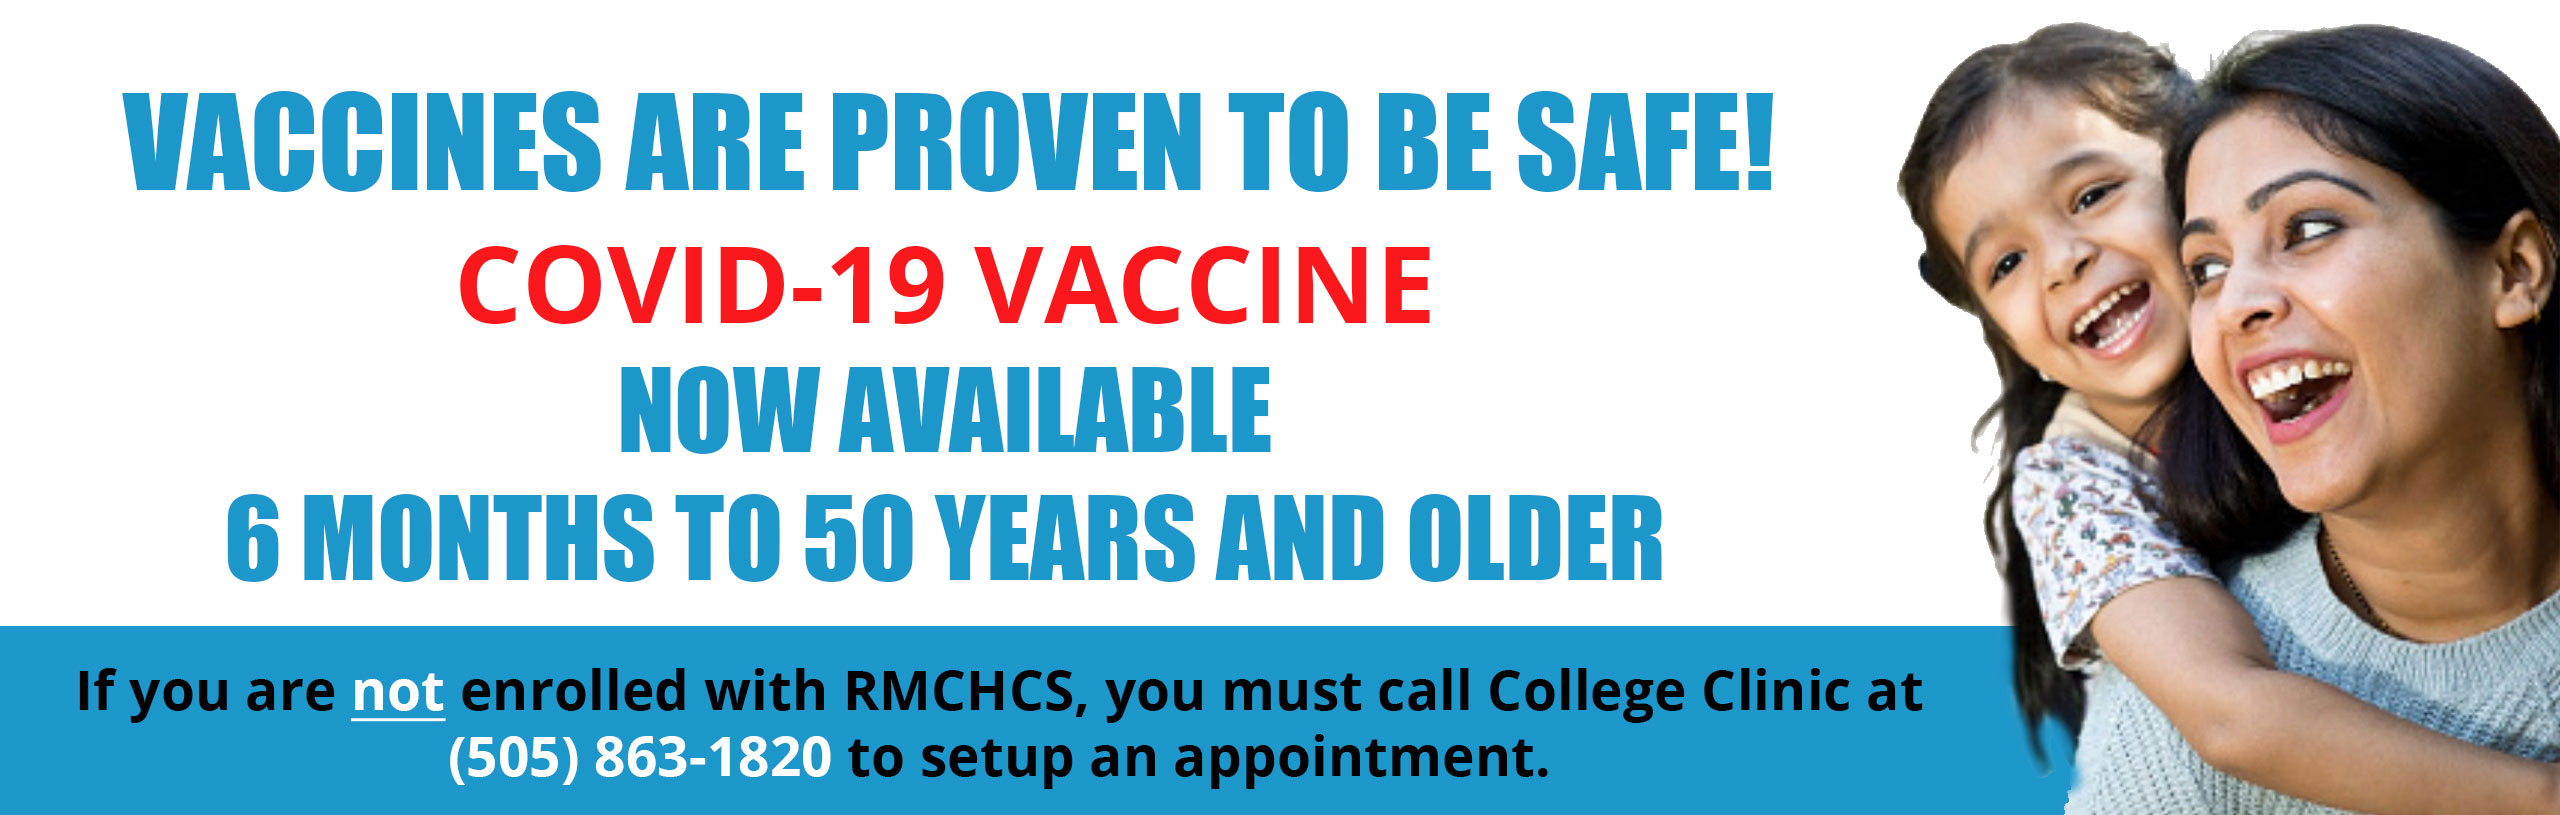 Banner picture of a mother and her little girl behind her with her arms around her mom. They are both smiling. 

Banner says:

Vaccines are proven to be safe!
COVID-19 VACCINE
NOW AVAILABLE 6 MONTHS TO 50 YEARS AND OLDER

If you are not enrolled with RMCHCS, you must call College Clinic at (505)863-1820 to setup an appointment.